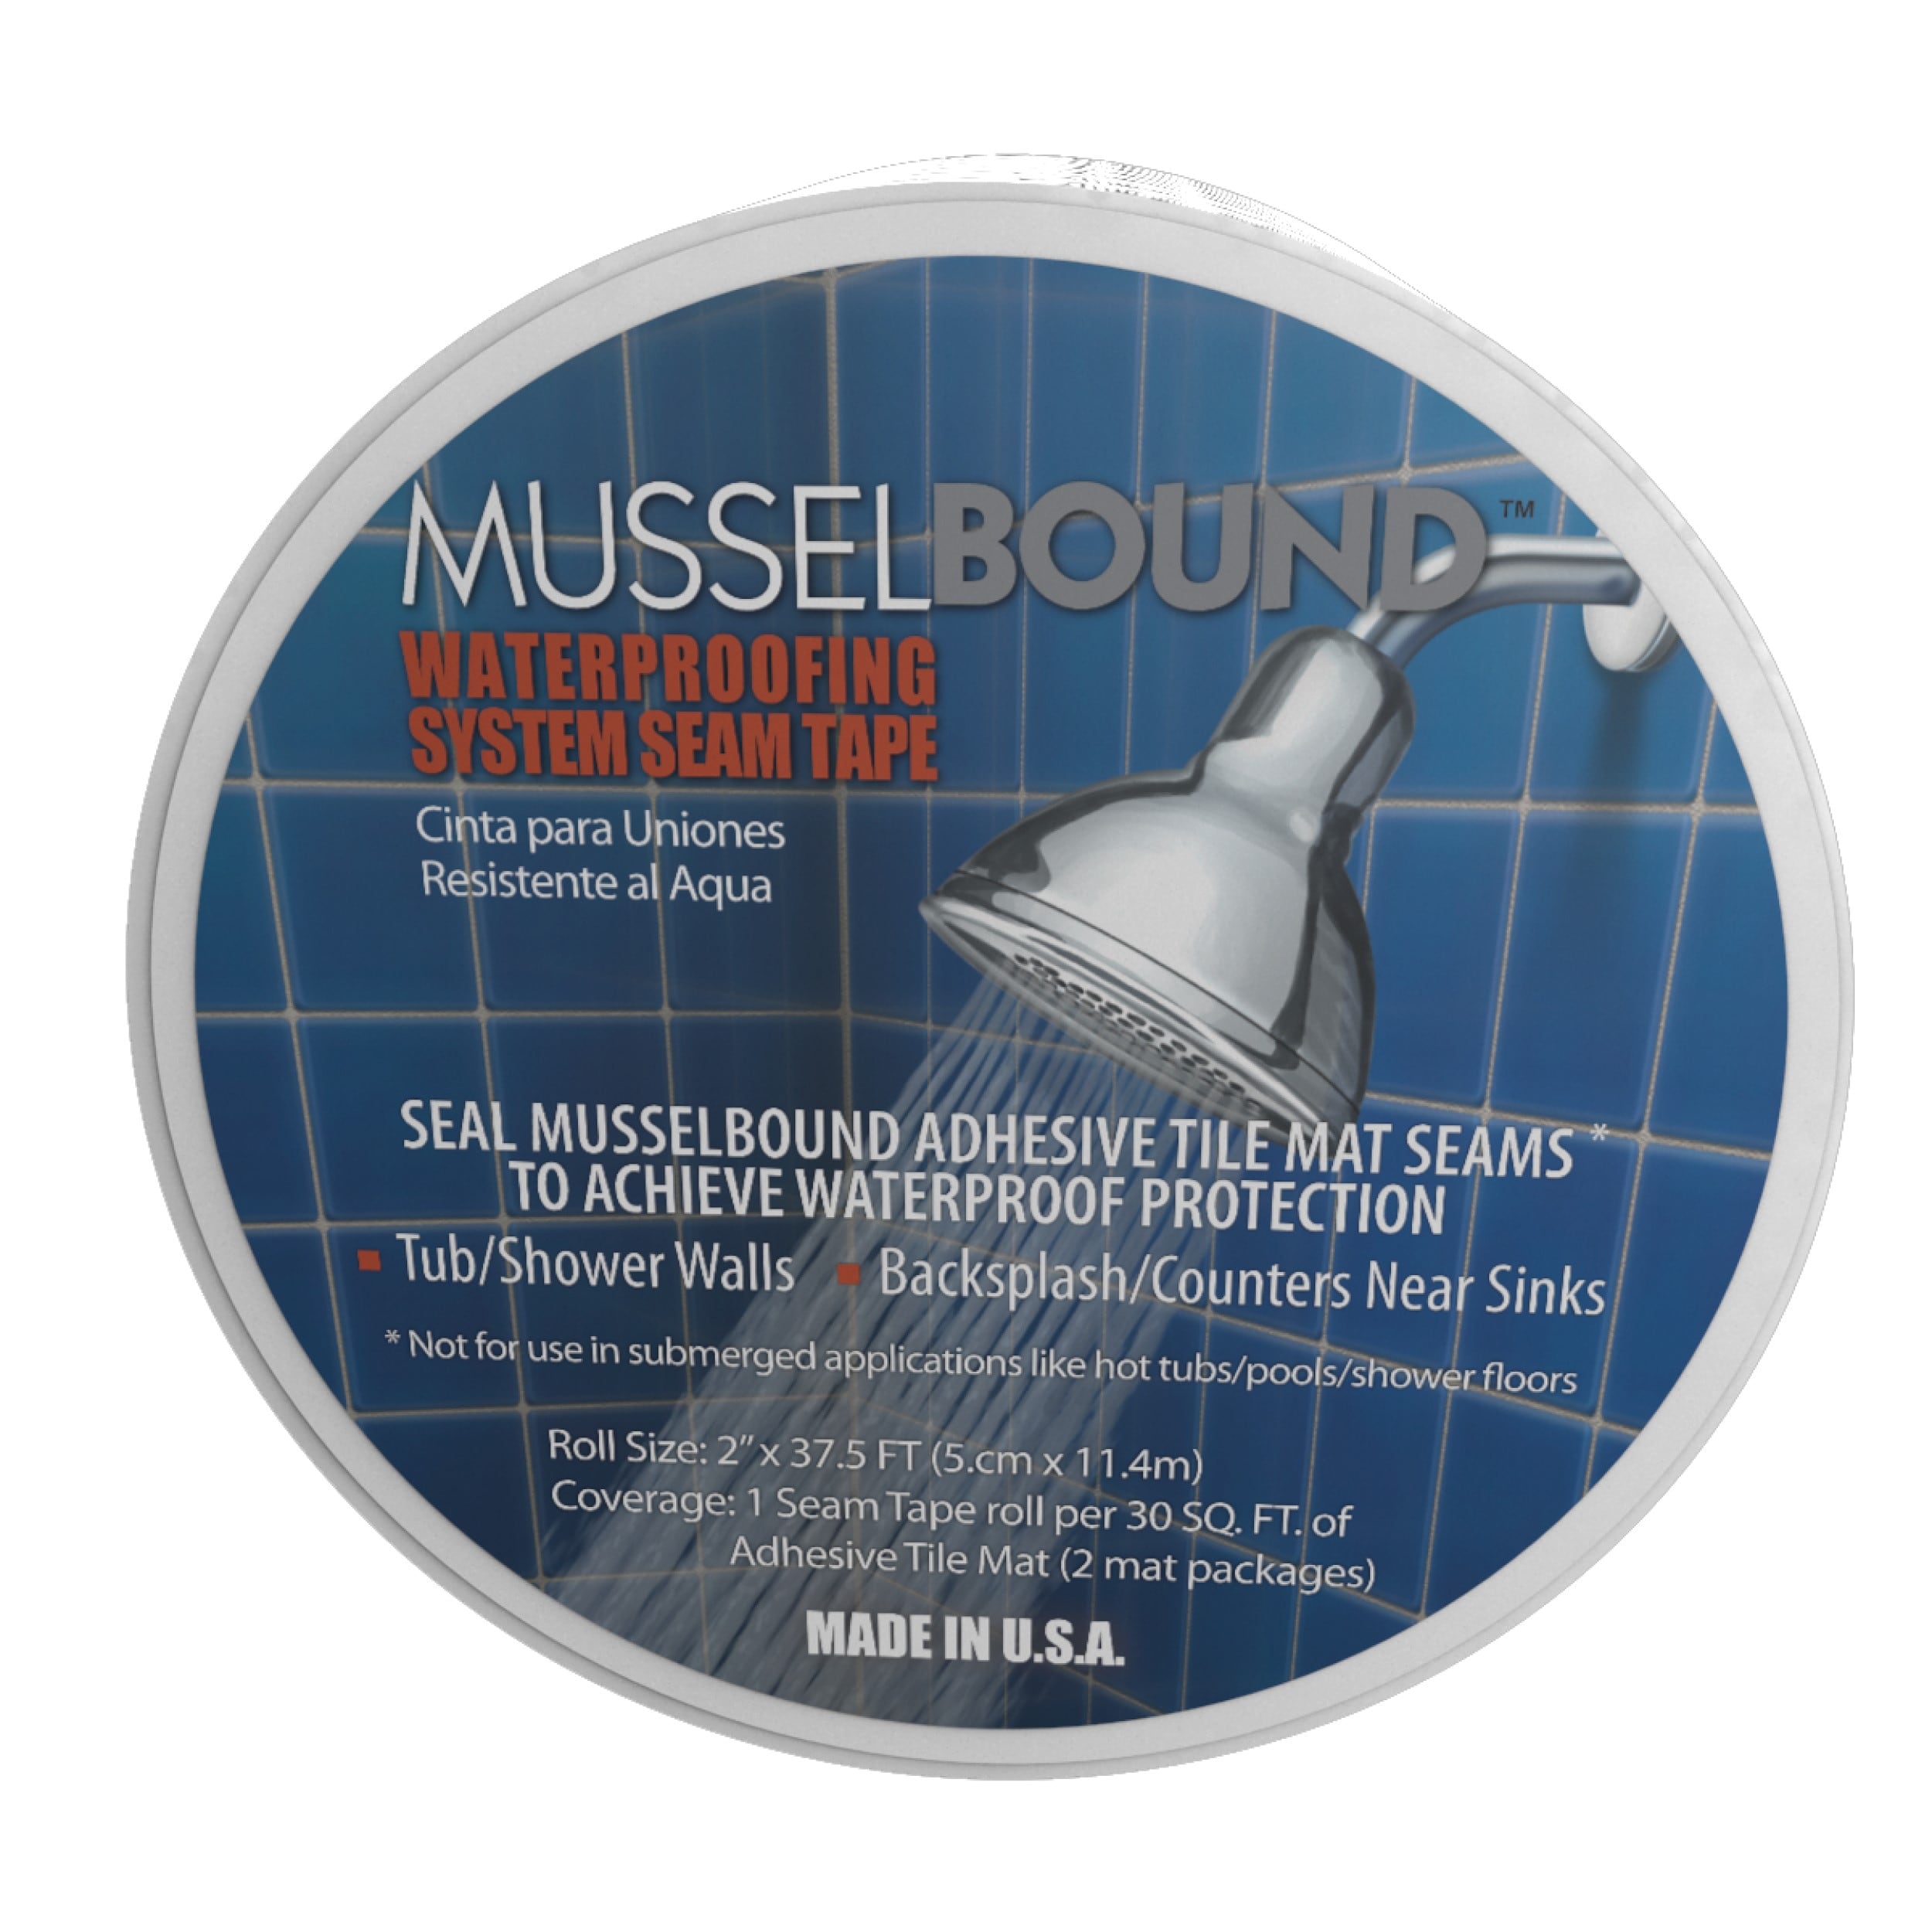 MusselBound Adhesive Tile Mat - double sided adhesive - Glass tile WOW!!!  added to shower with MusselBound Adhesive Tile Mat and MusselBound  Waterproofing System Seam Tape. Video coming soon! available at all